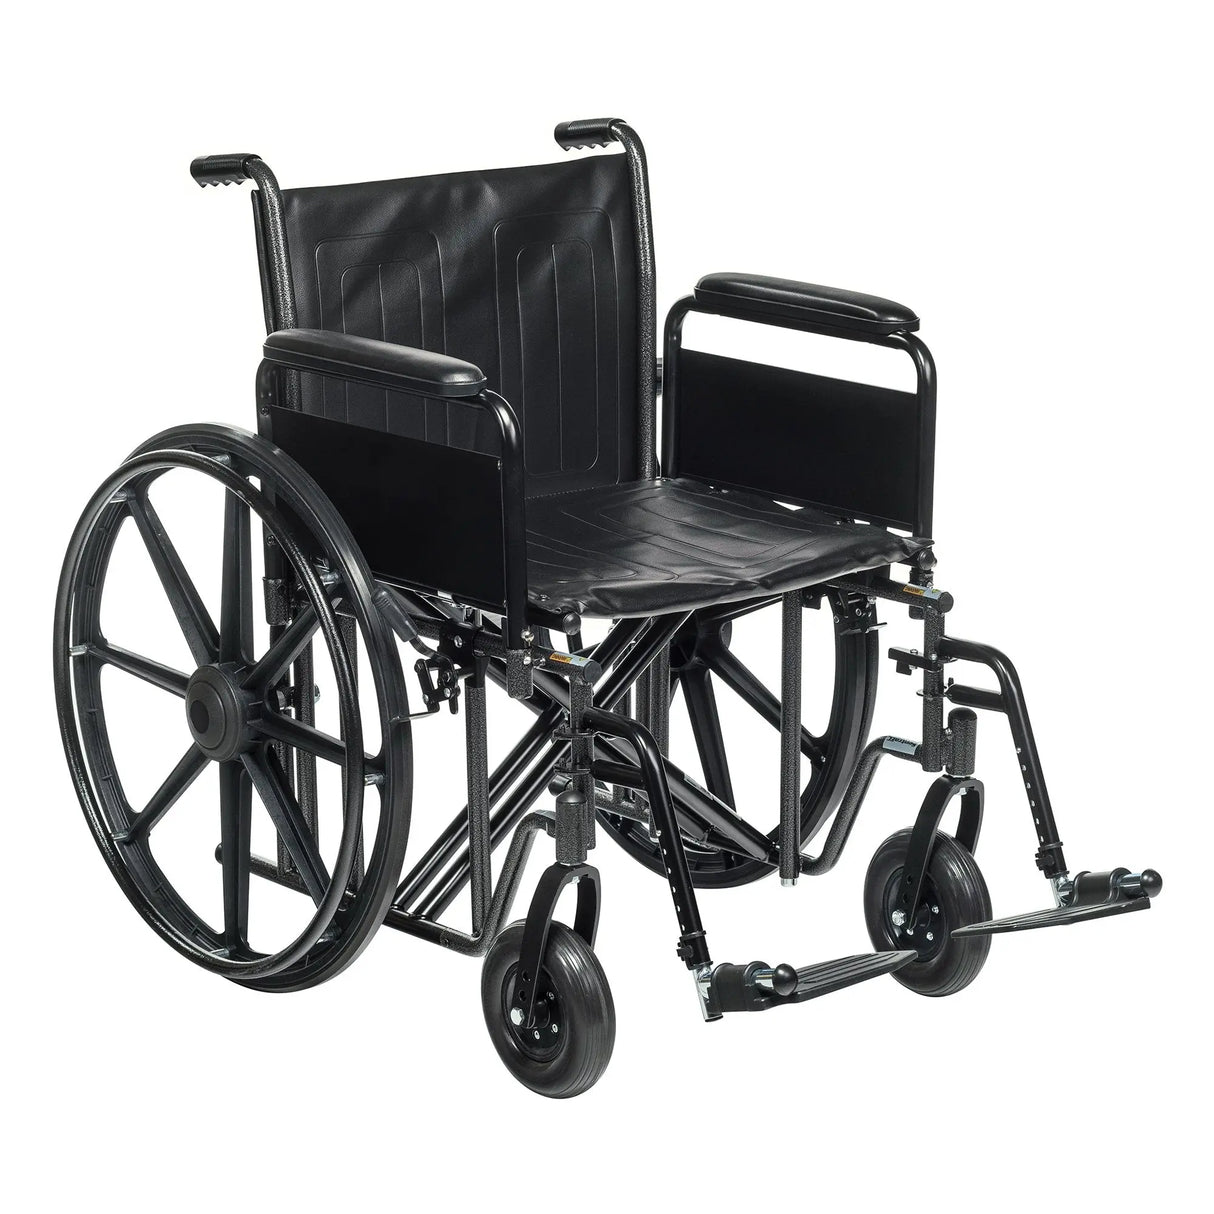 Bariatric Wheelchair McKesson Dual Axle Full Length Arm Swing-Away Footrest Black Upholstery 22 Inch Seat Width Adult 450 lbs. Weight Capacity - getMovility